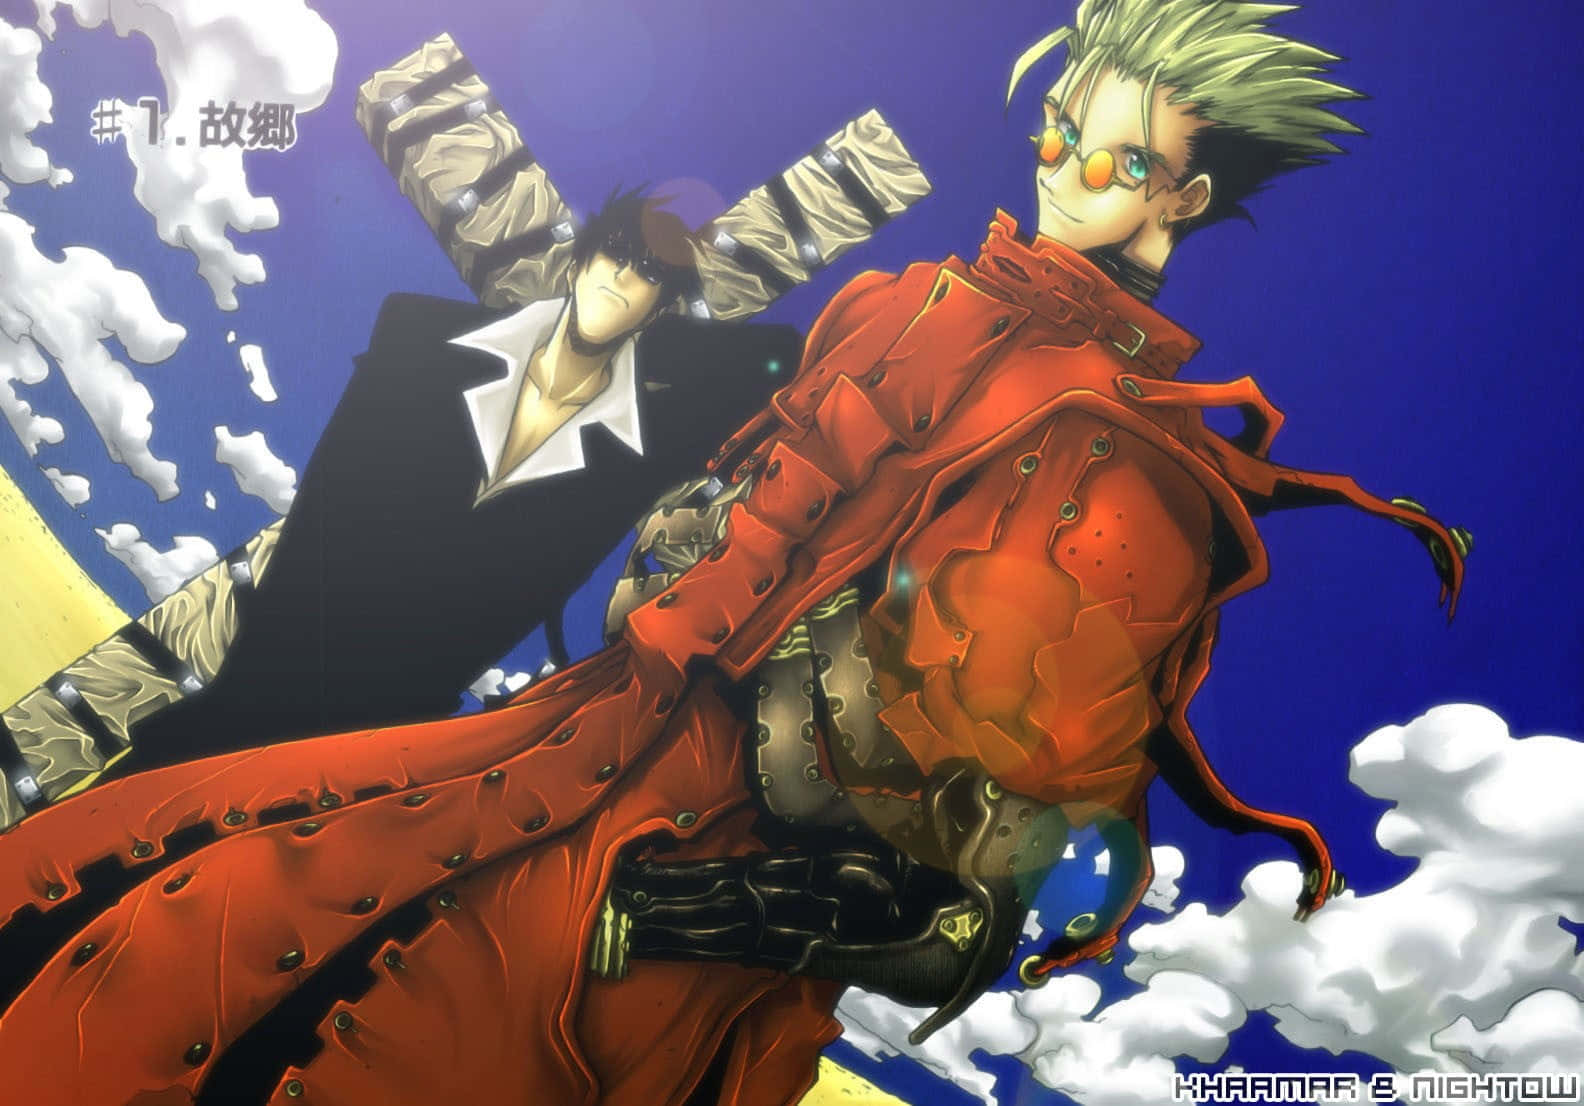 Vash the Stampede, the Outlaw of a Million Faces